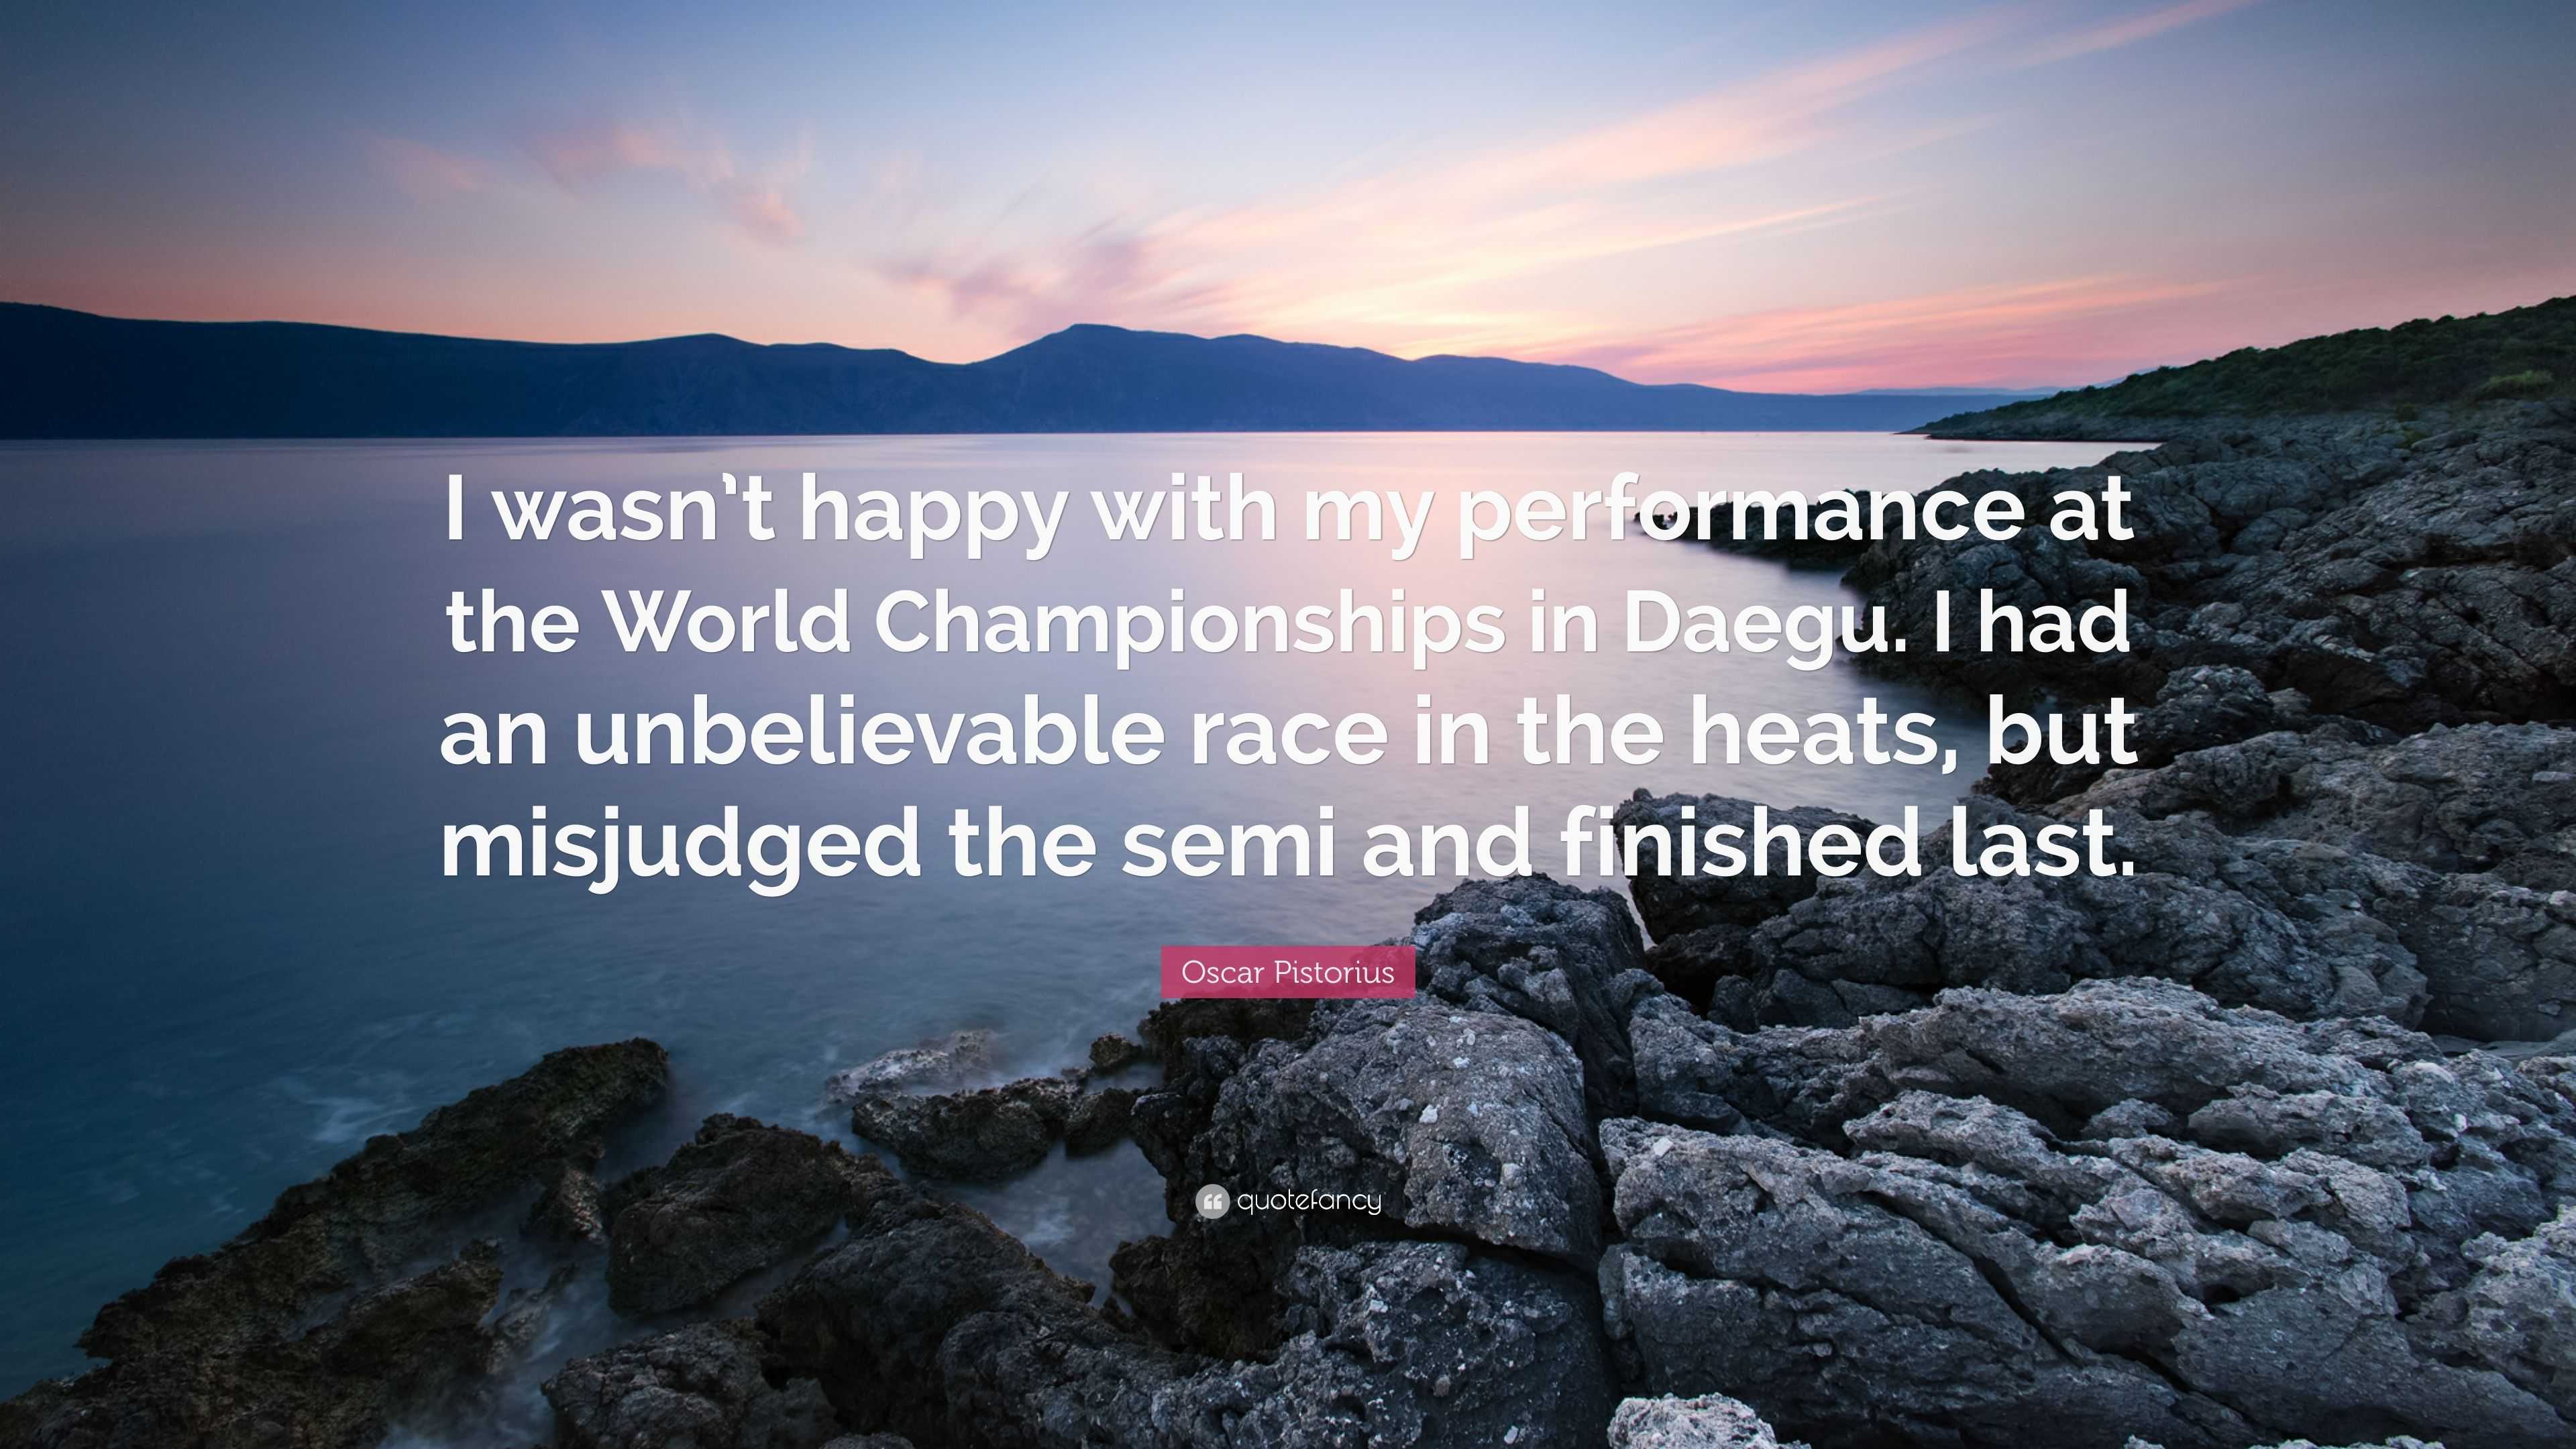 Oscar Pistorius Quote I Wasn T Happy With My Performance At The Images, Photos, Reviews